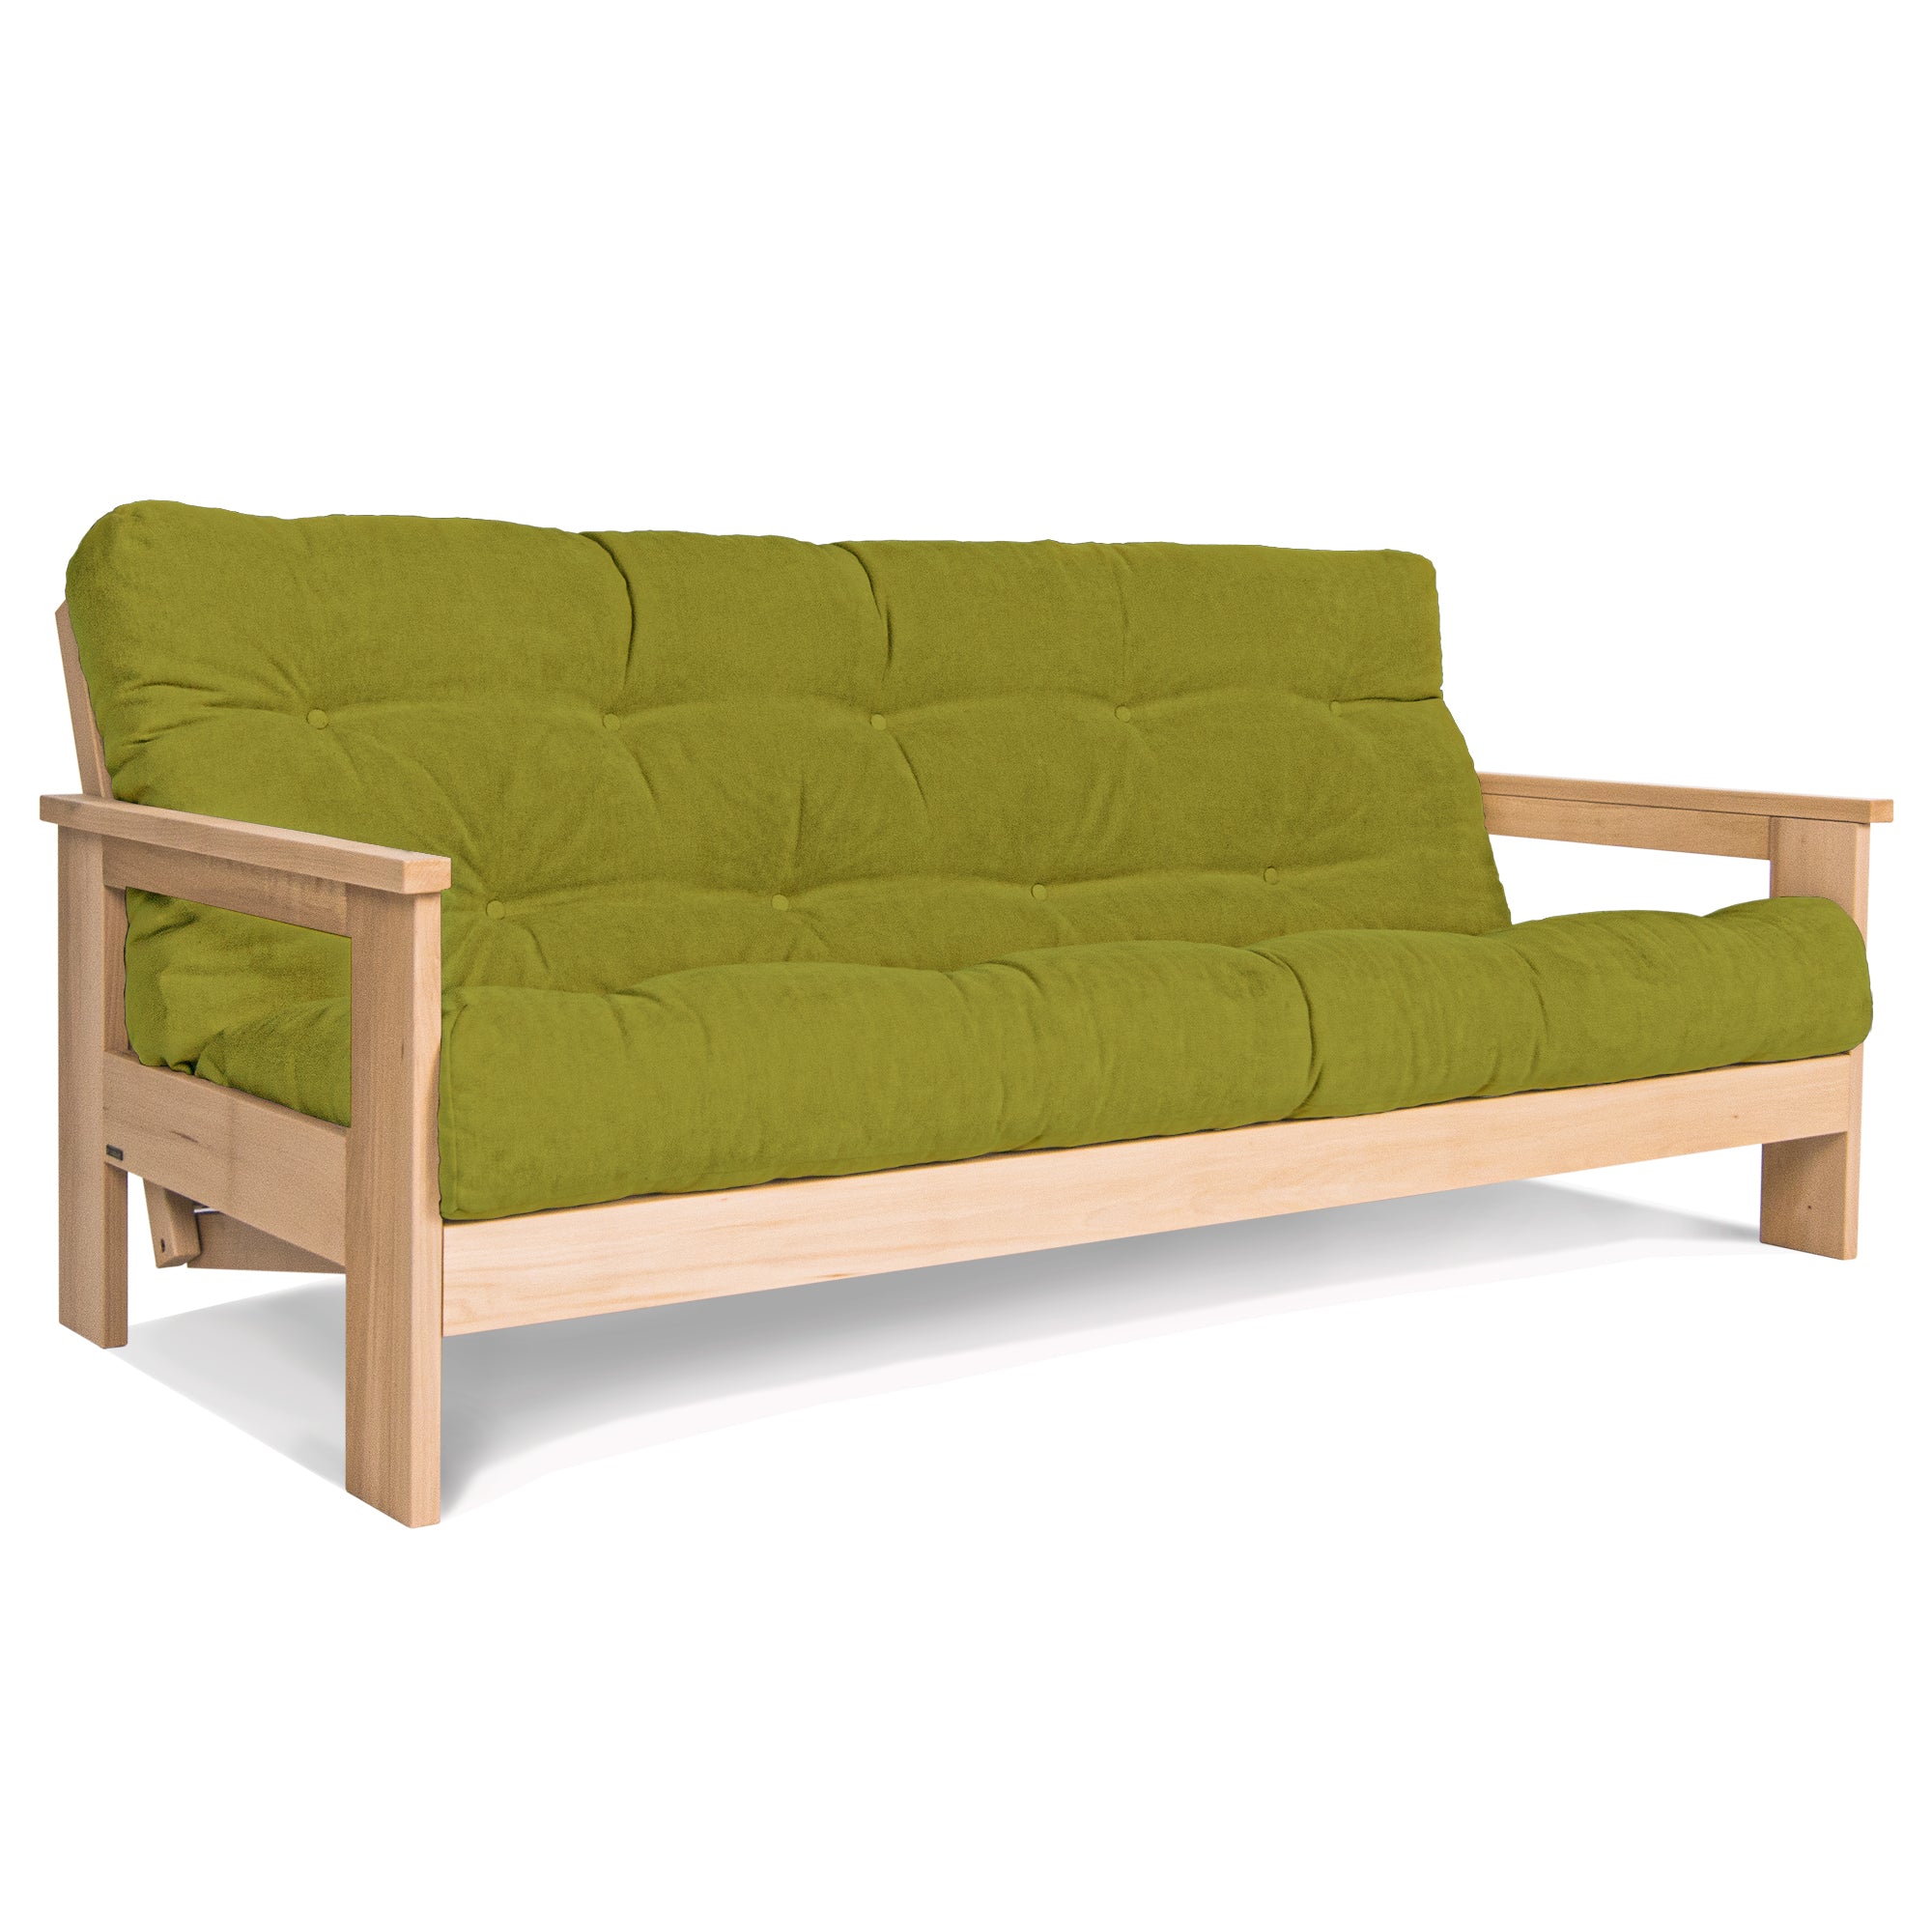 MEXICO Folding Sofa Bed-Beech Wood Frame-Natural Colour--green fabric